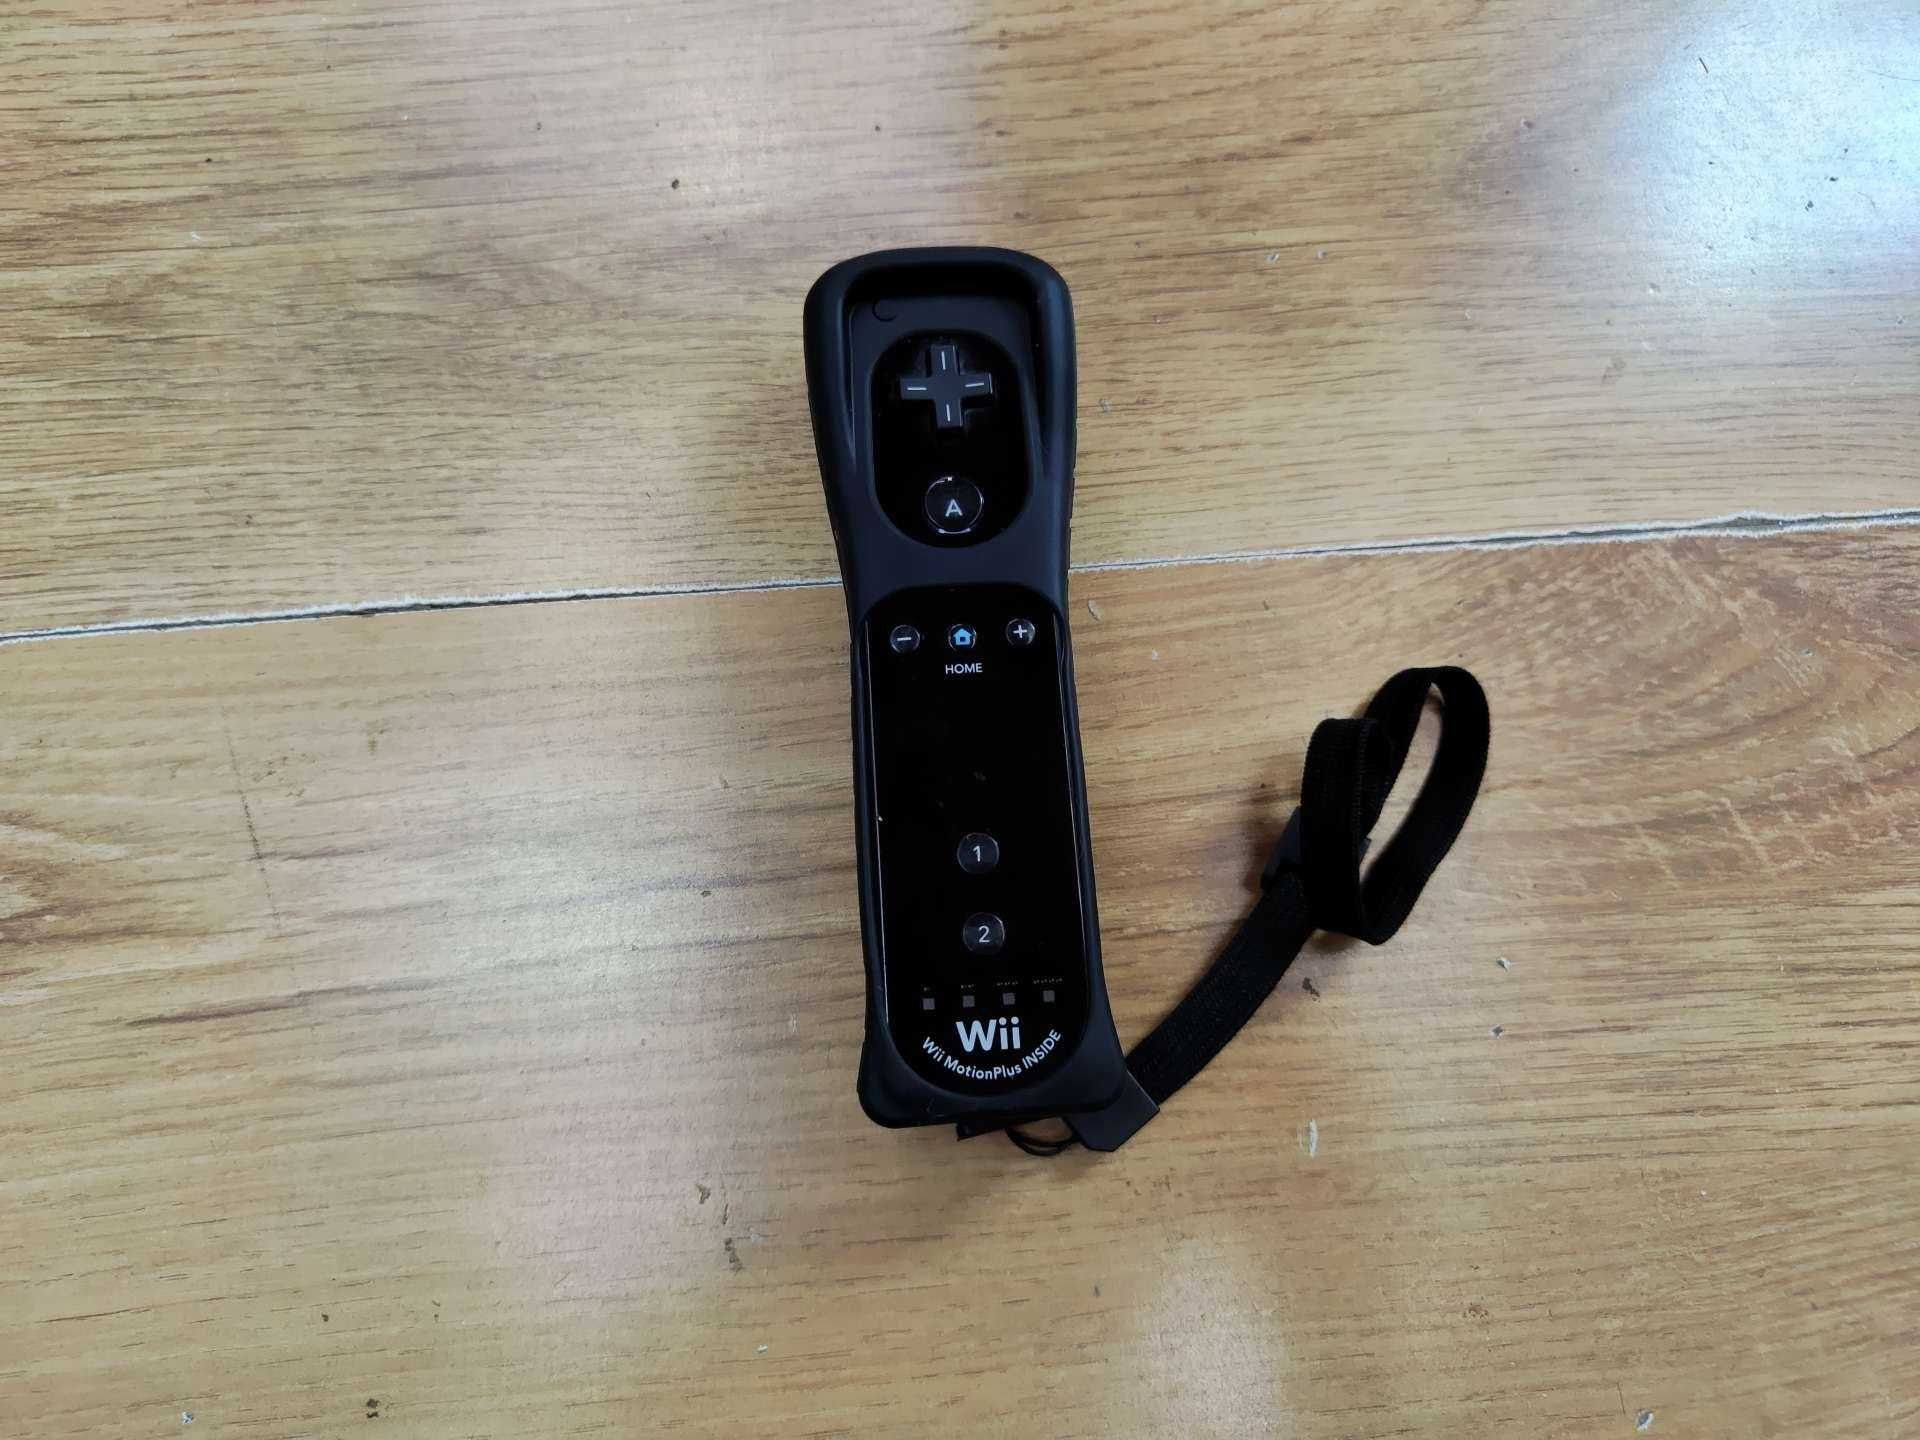 Remote + nunchuck wii motion plus inside